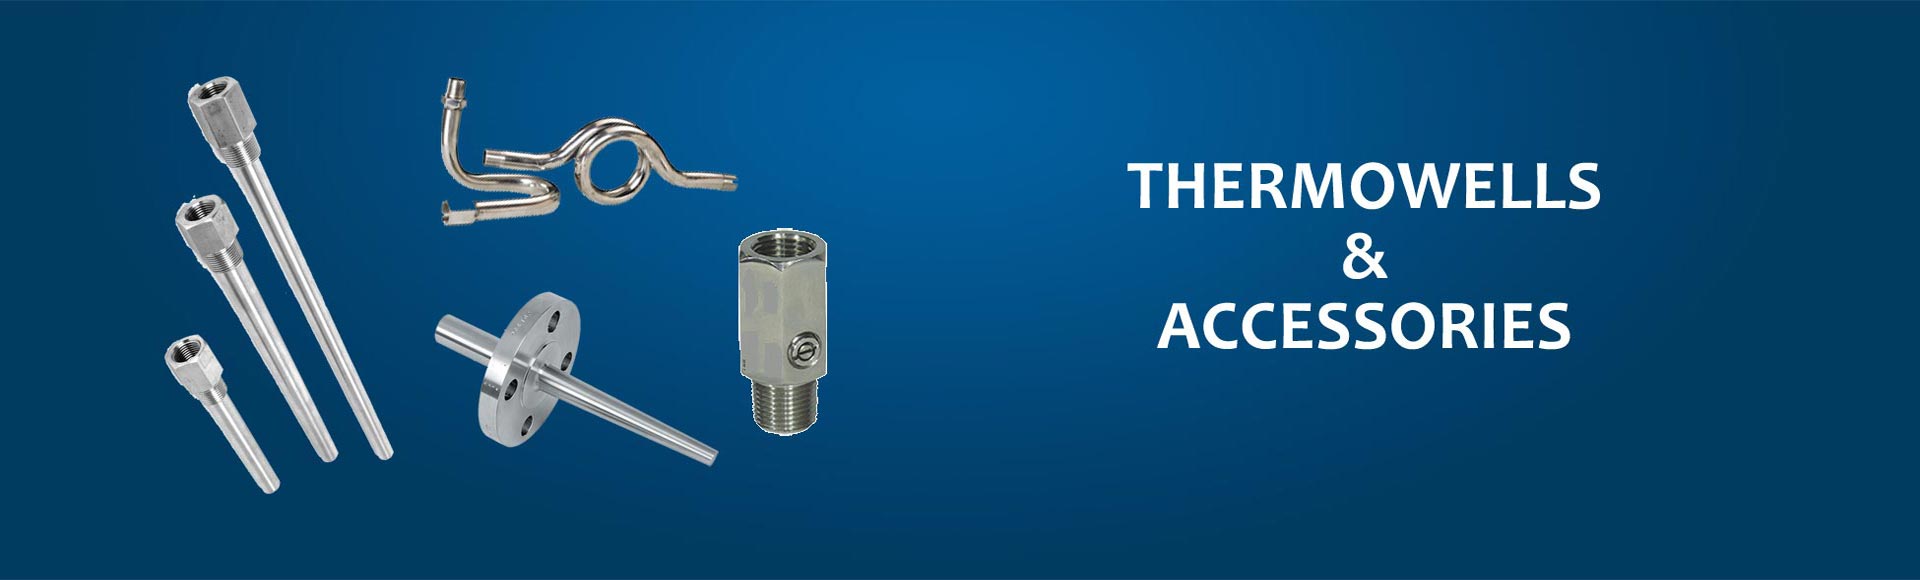 Thermowells & Accessories Banner